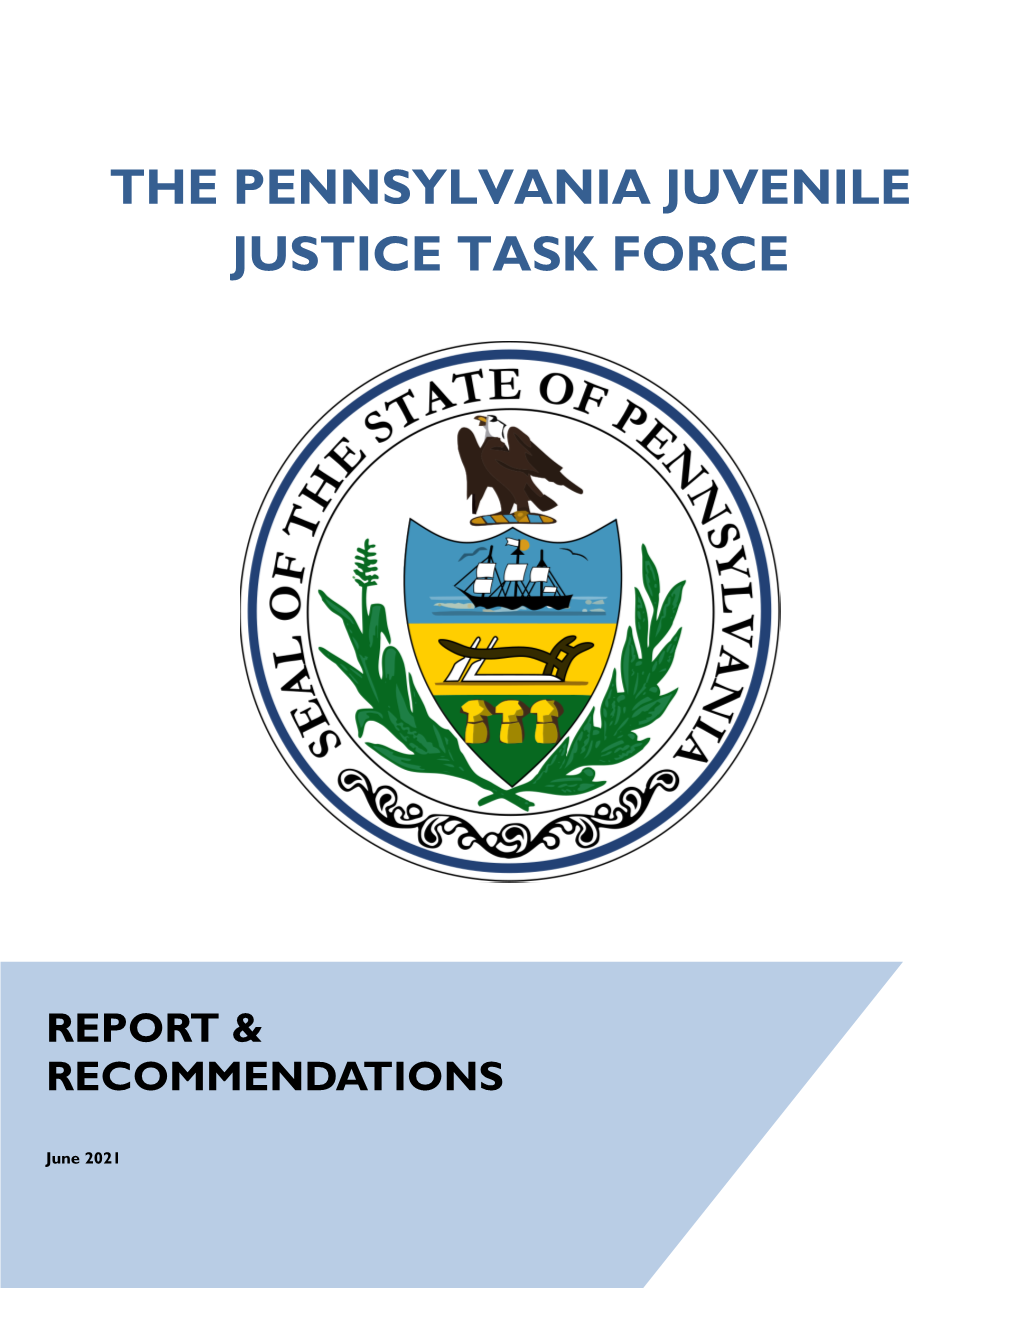 The Pennsylvania Juvenile Justice Task Force